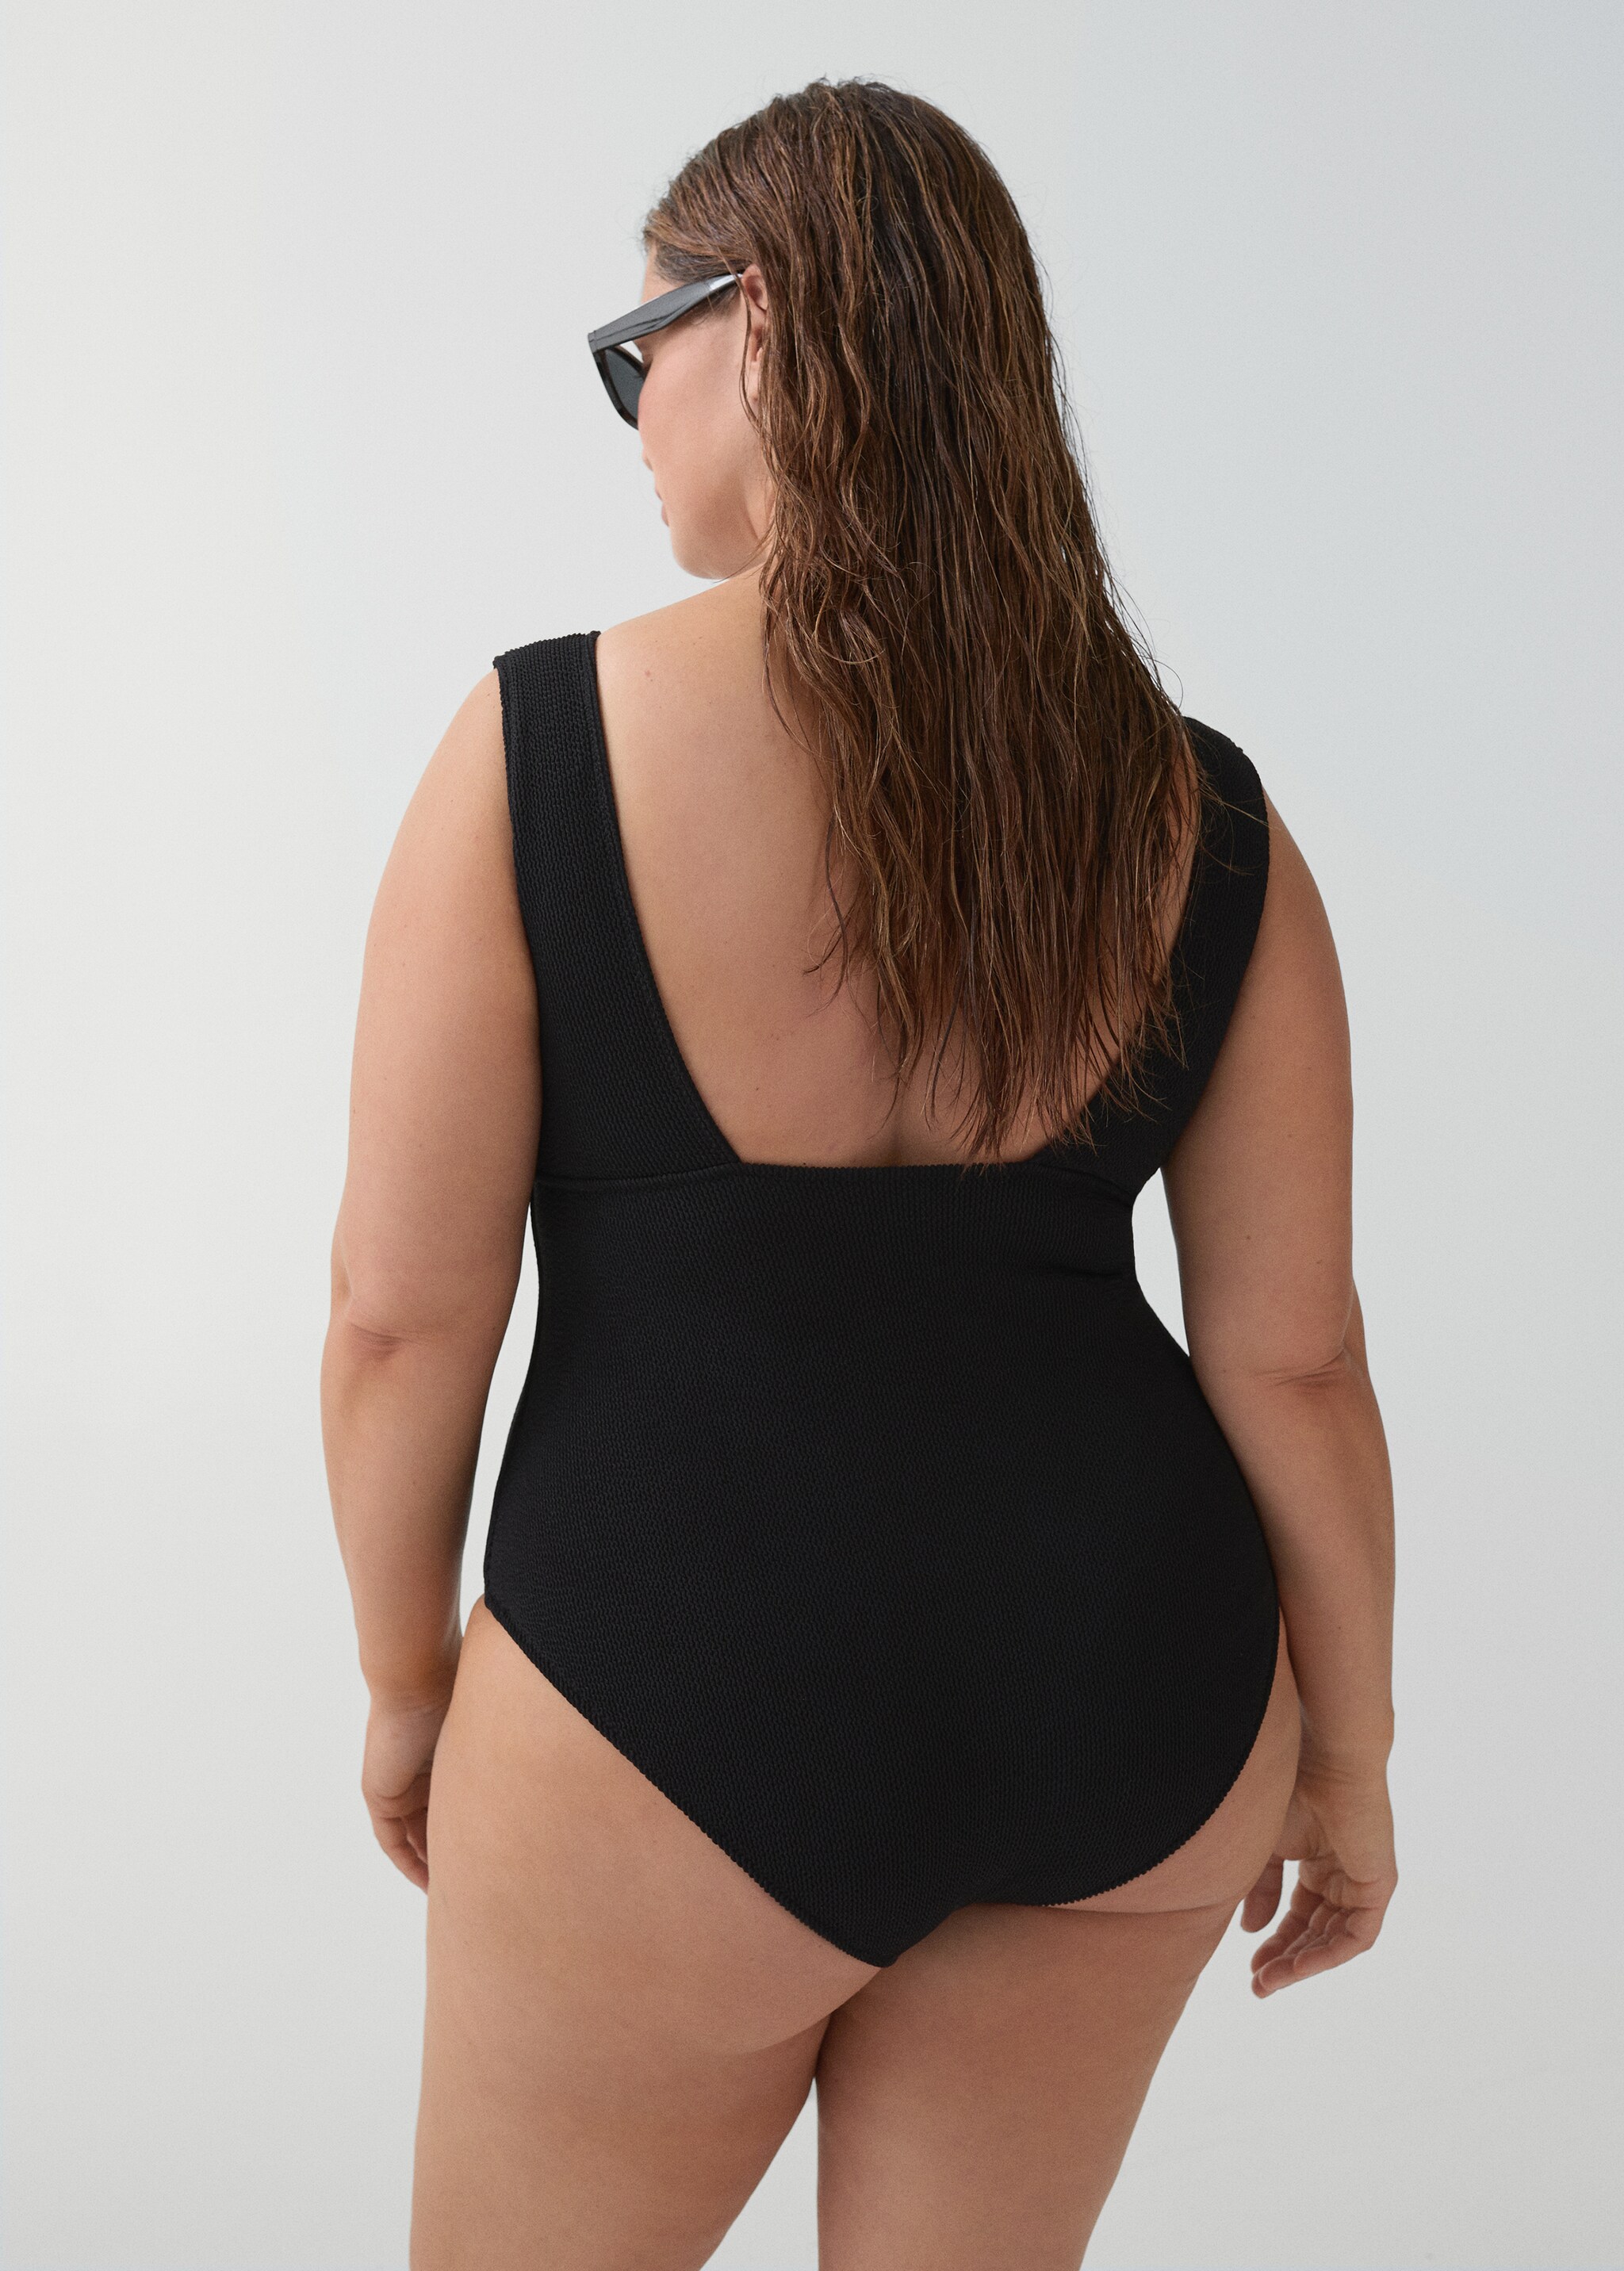 V-neck swimsuit - Details of the article 4